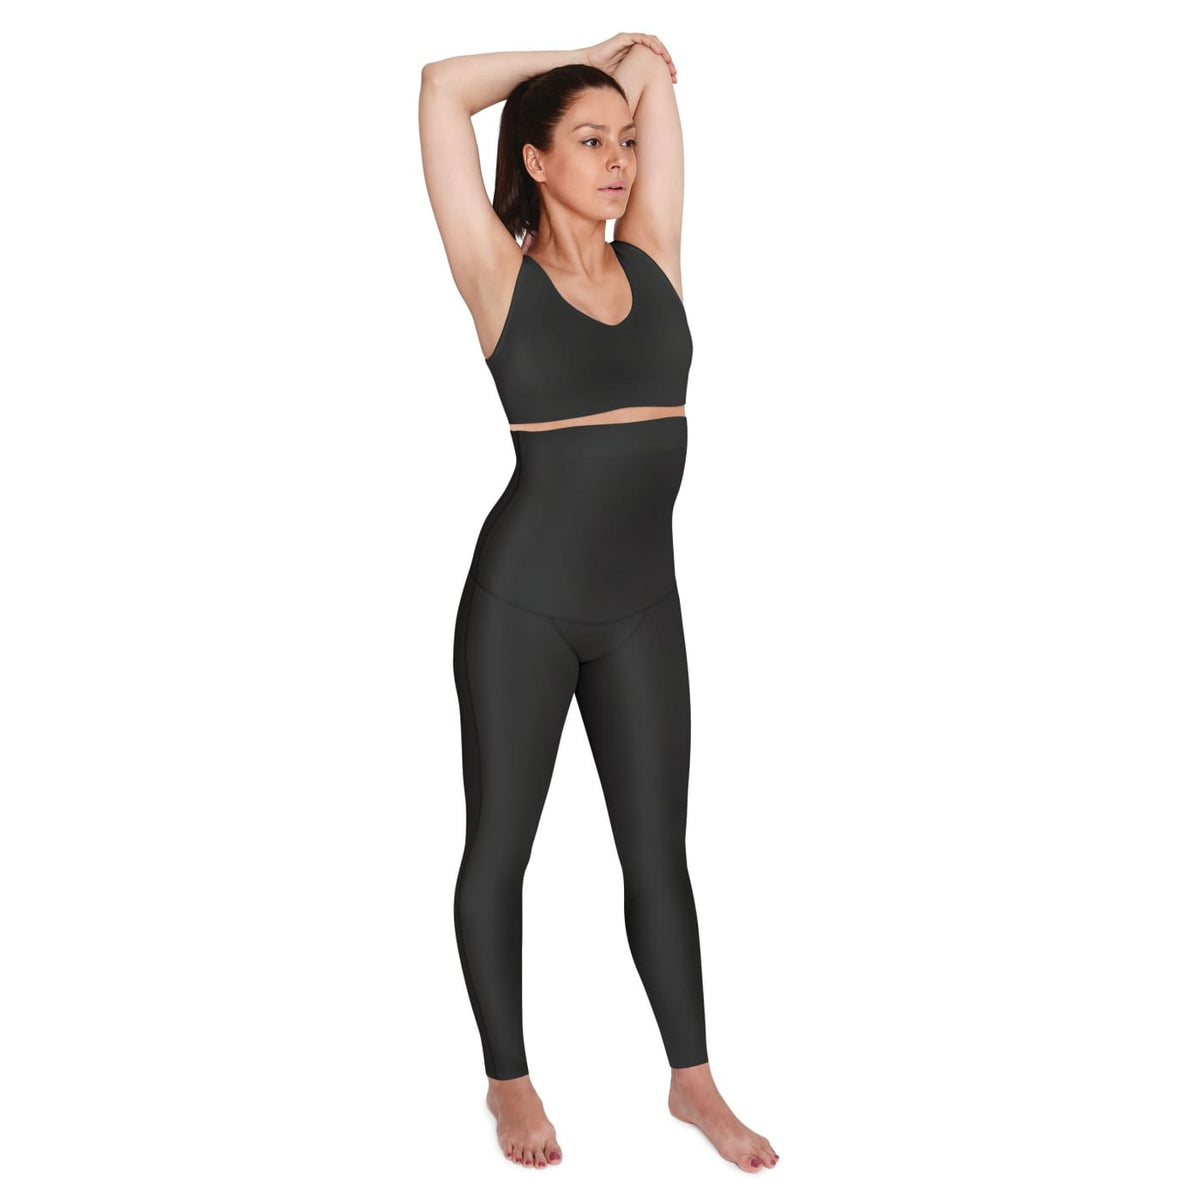 SRC Recovery Leggings - Black XL - FOR MUM - MATERNITY SUPPORT GARMENTS (PRE/POST)